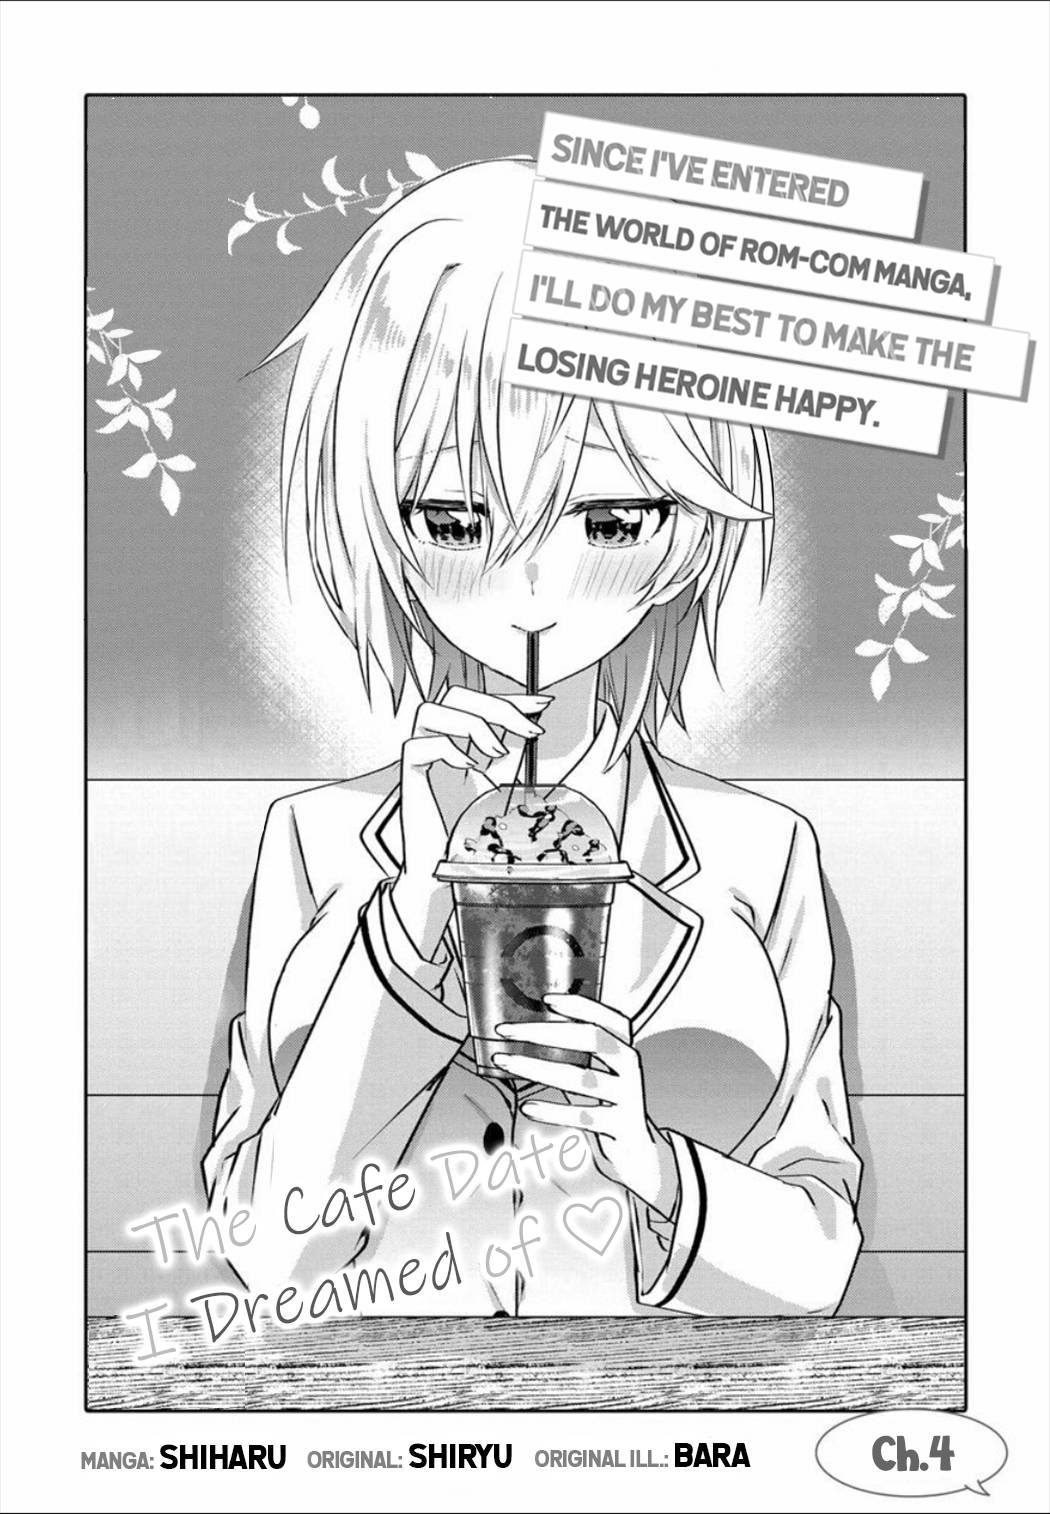 Since I’ve Entered the World of Romantic Comedy Manga, I’ll Do My Best to Make the Losing Heroine Happy. - chapter 4.1 - #1